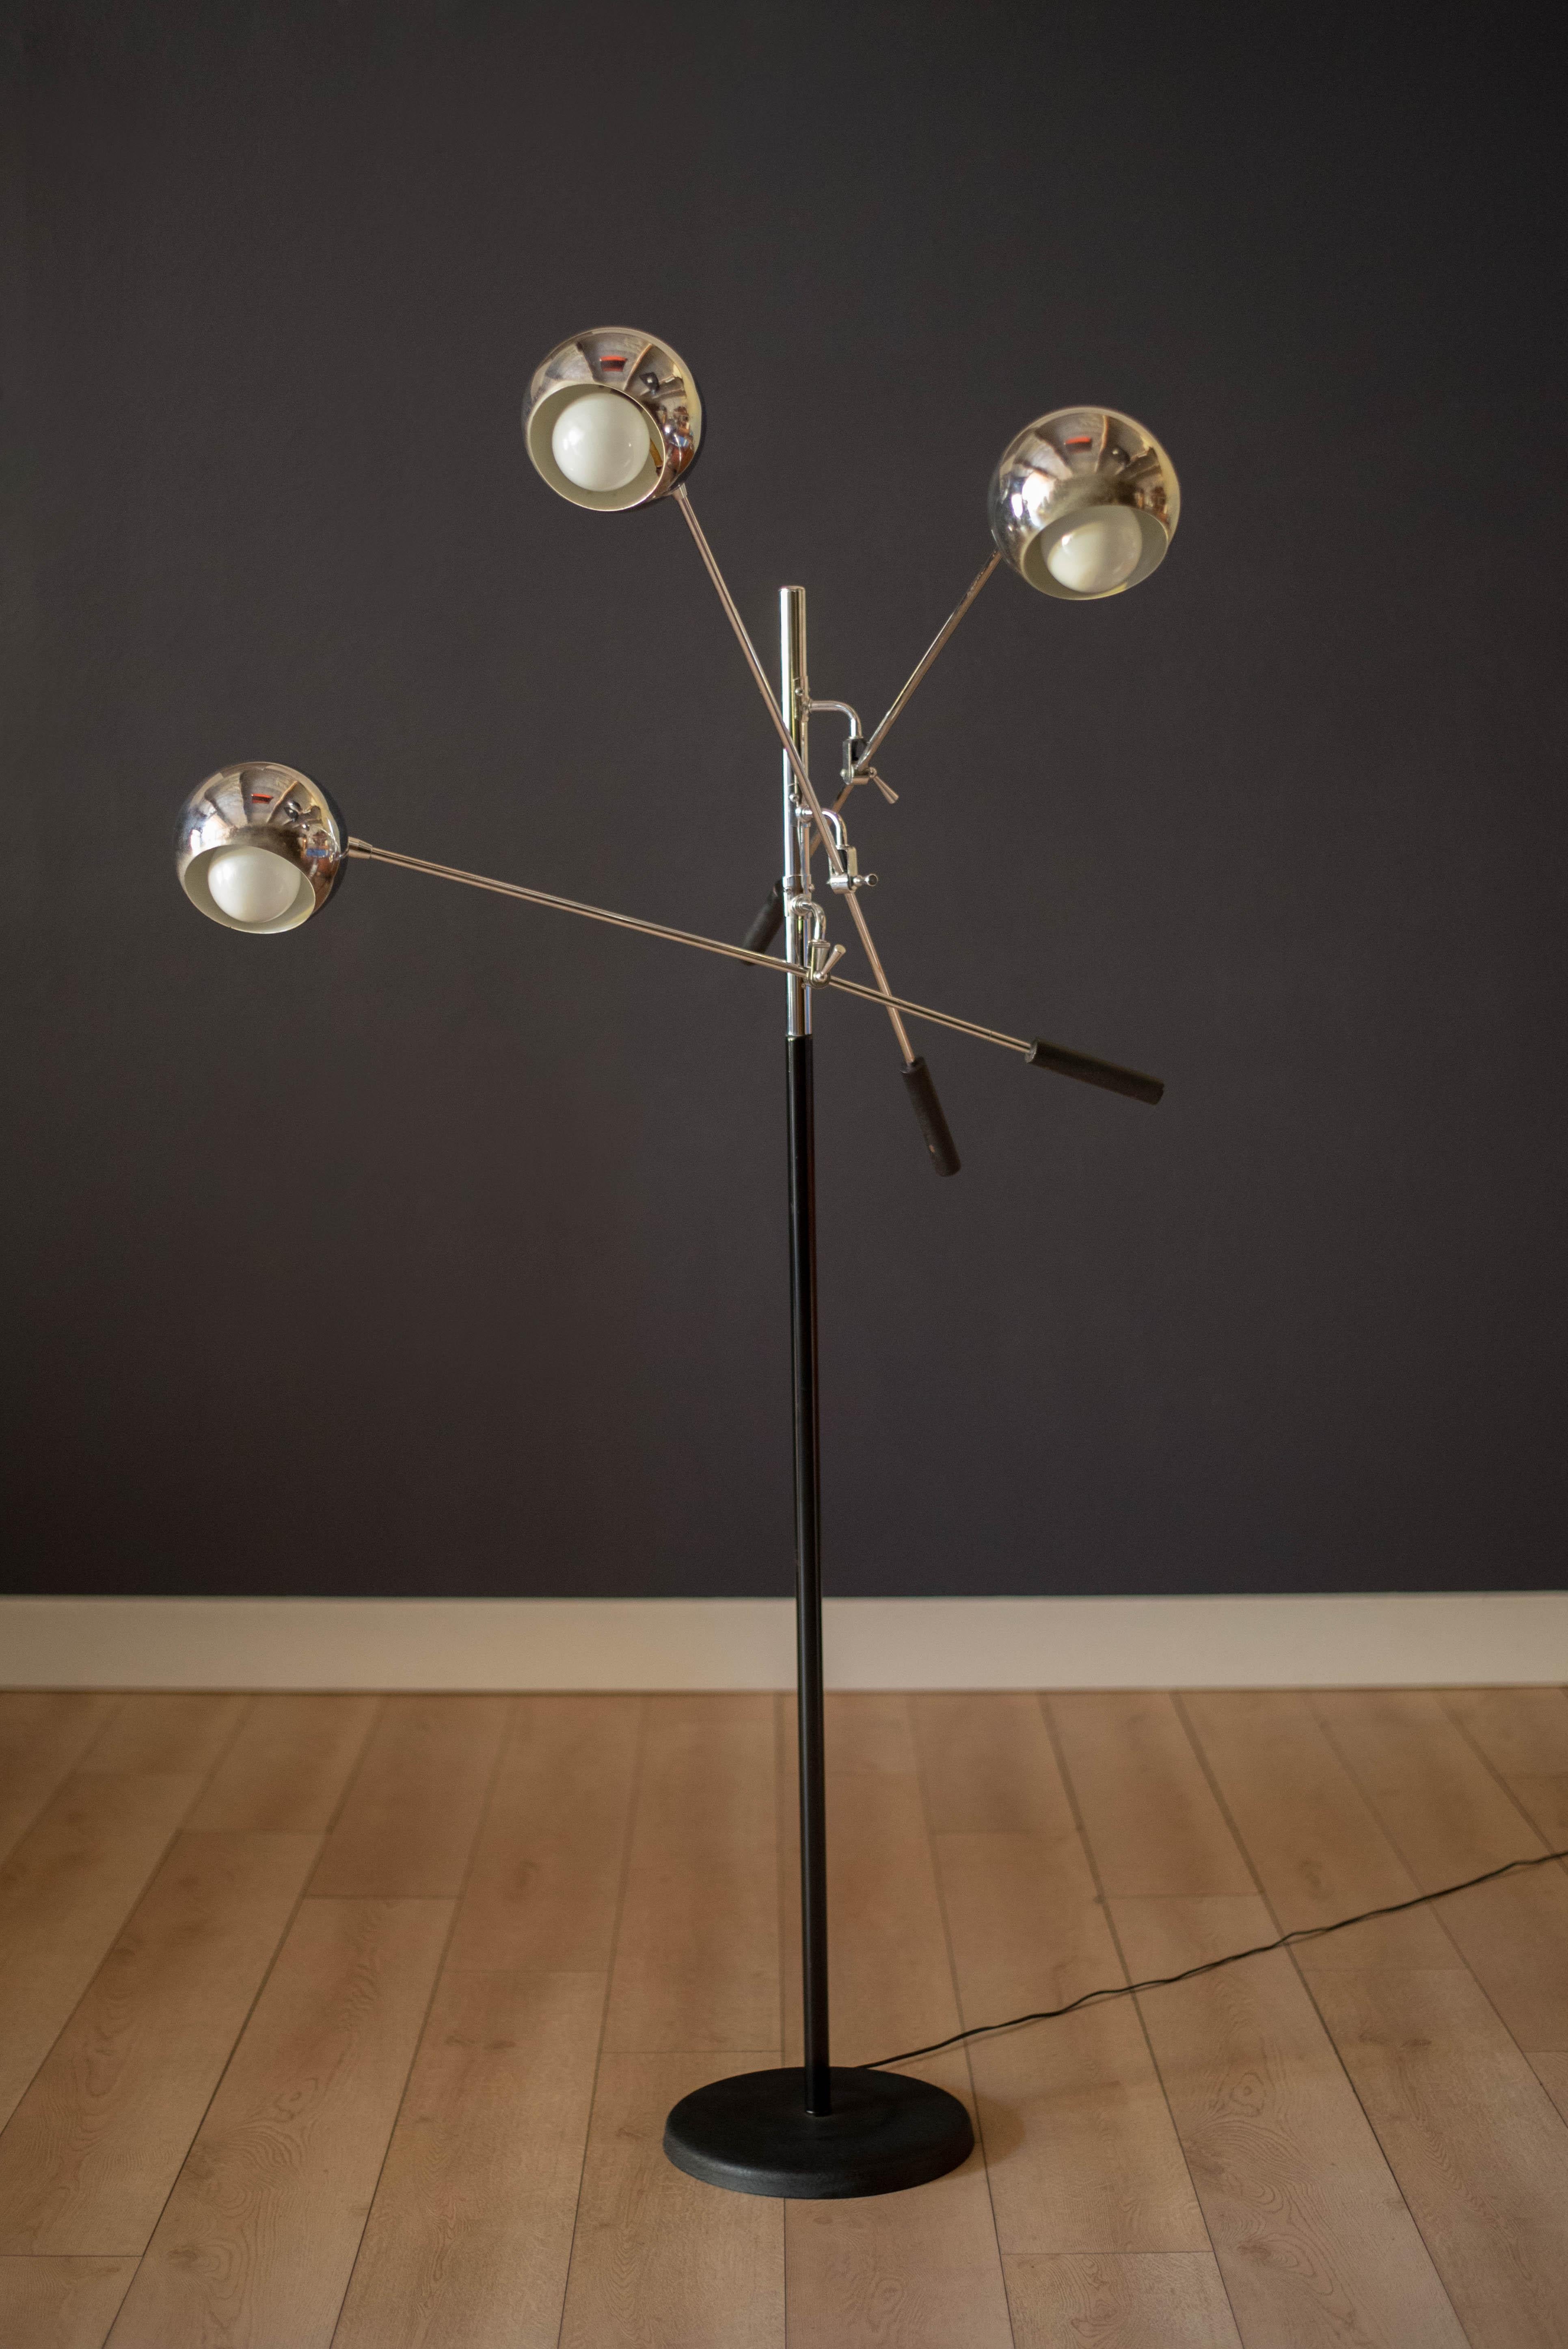 Vintage Triennale floor lamp designed by Robert Sonneman circa 1970's. This versatile piece features three adjustable chrome orb light heads that pivot on balancing lever arms. Globe light bulbs are not included. 

Lever arm: 36